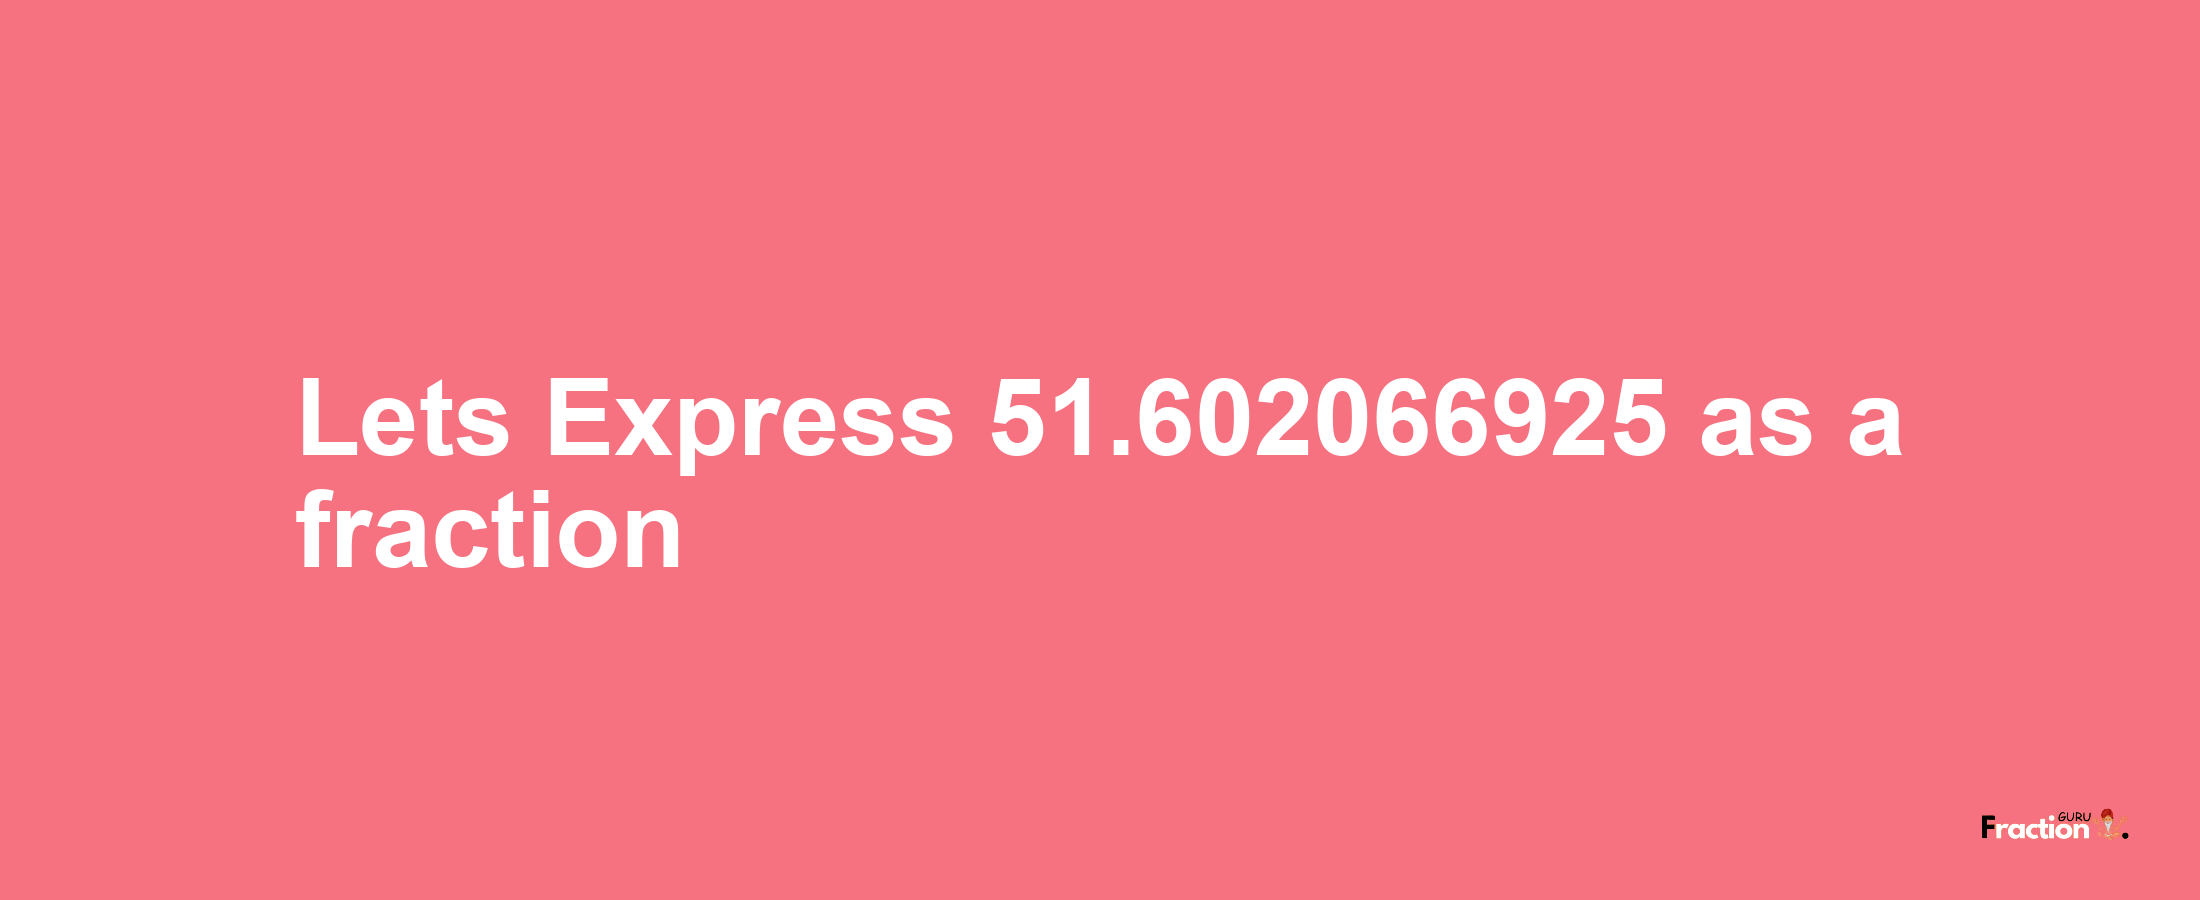 Lets Express 51.602066925 as afraction